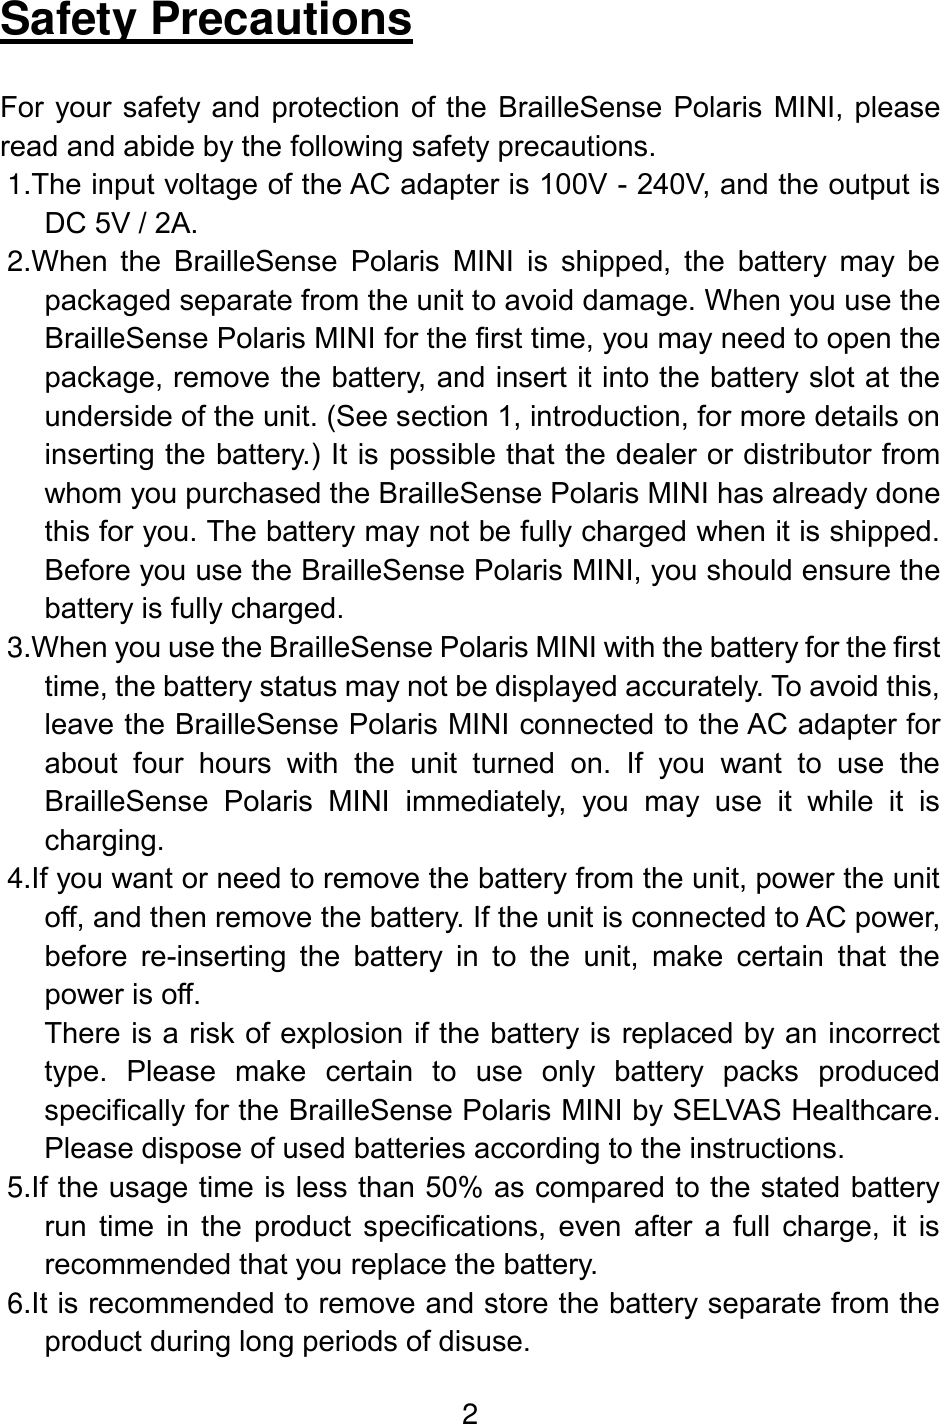 2  Safety Precautions  For your safety and protection of the BrailleSense Polaris MINI, please read and abide by the following safety precautions. 1.The input voltage of the AC adapter is 100V - 240V, and the output is DC 5V / 2A. 2.When  the  BrailleSense  Polaris  MINI  is  shipped,  the  battery  may  be packaged separate from the unit to avoid damage. When you use the BrailleSense Polaris MINI for the first time, you may need to open the package, remove the battery, and insert it into the battery slot at the underside of the unit. (See section 1, introduction, for more details on inserting the battery.) It is possible that the dealer or distributor from whom you purchased the BrailleSense Polaris MINI has already done this for you. The battery may not be fully charged when it is shipped. Before you use the BrailleSense Polaris MINI, you should ensure the battery is fully charged.  3.When you use the BrailleSense Polaris MINI with the battery for the first time, the battery status may not be displayed accurately. To avoid this, leave the BrailleSense Polaris MINI connected to the AC adapter for about  four  hours  with  the  unit  turned  on.  If  you  want  to  use  the BrailleSense  Polaris  MINI  immediately,  you  may  use  it  while  it  is charging. 4.If you want or need to remove the battery from the unit, power the unit off, and then remove the battery. If the unit is connected to AC power, before  re-inserting  the  battery  in  to  the  unit,  make  certain  that  the power is off. There is a risk of explosion if the battery is replaced by an incorrect type.  Please  make  certain  to  use  only  battery  packs  produced specifically for the BrailleSense Polaris MINI by SELVAS Healthcare. Please dispose of used batteries according to the instructions. 5.If the usage time is less than 50% as compared to the stated battery run  time  in  the  product  specifications,  even  after  a  full  charge,  it  is recommended that you replace the battery. 6.It is recommended to remove and store the battery separate from the product during long periods of disuse. 